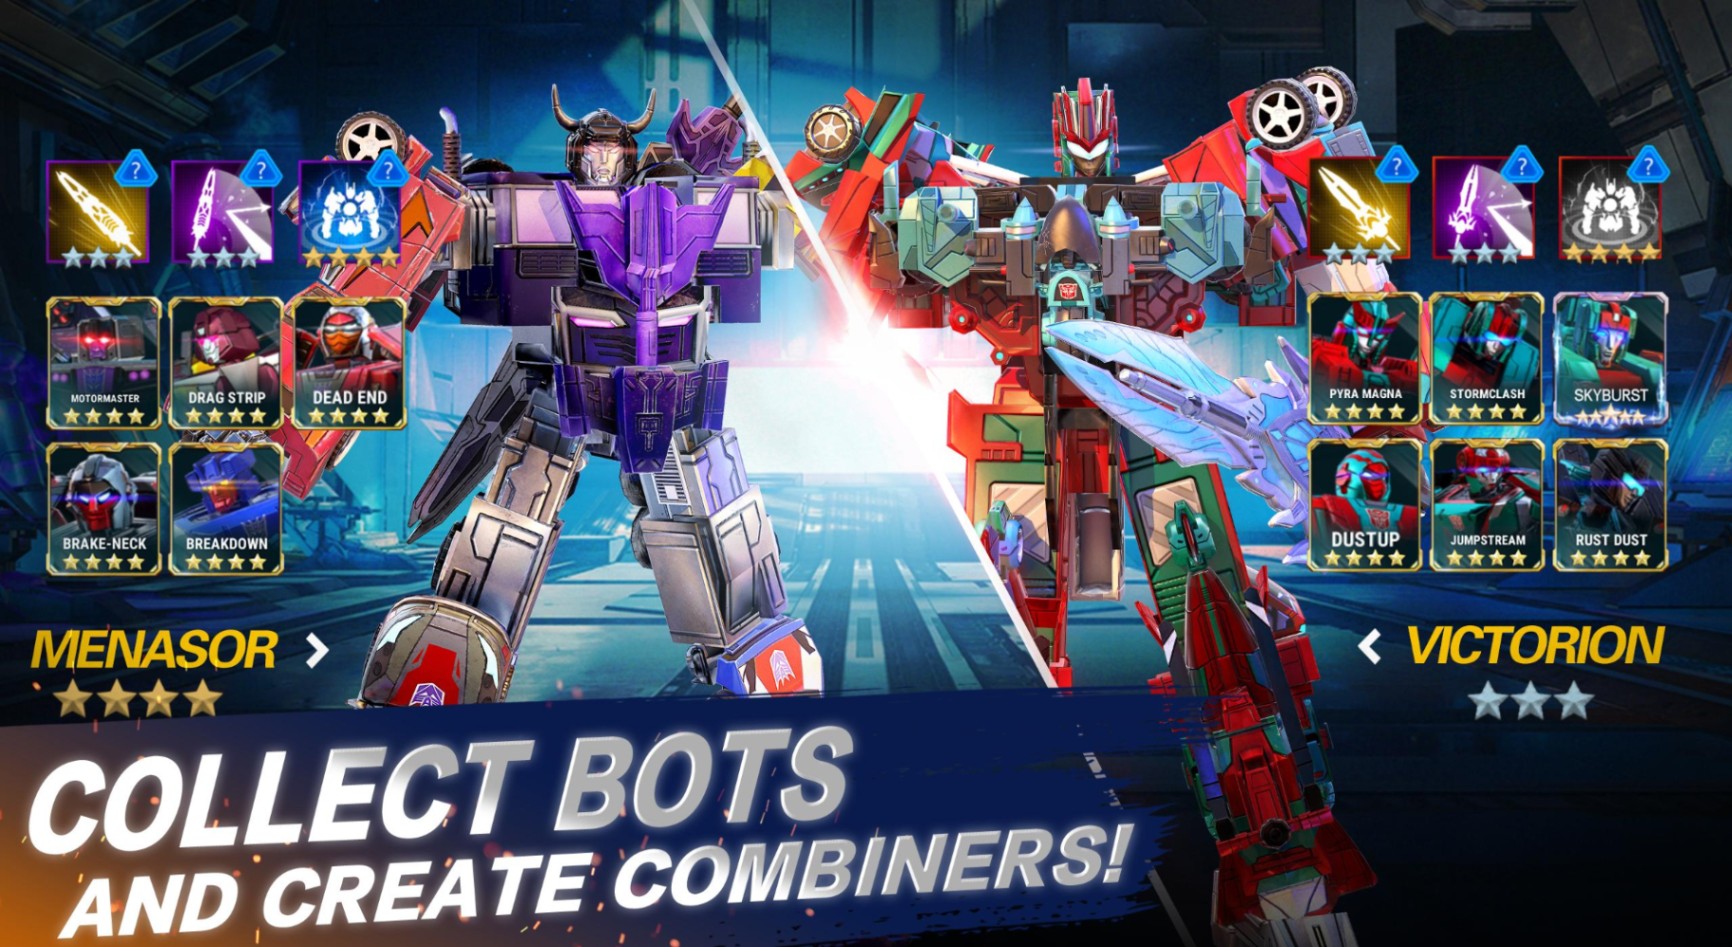 Transformers: Earth Wars - Learn How to Get the Best Characters, Events and More